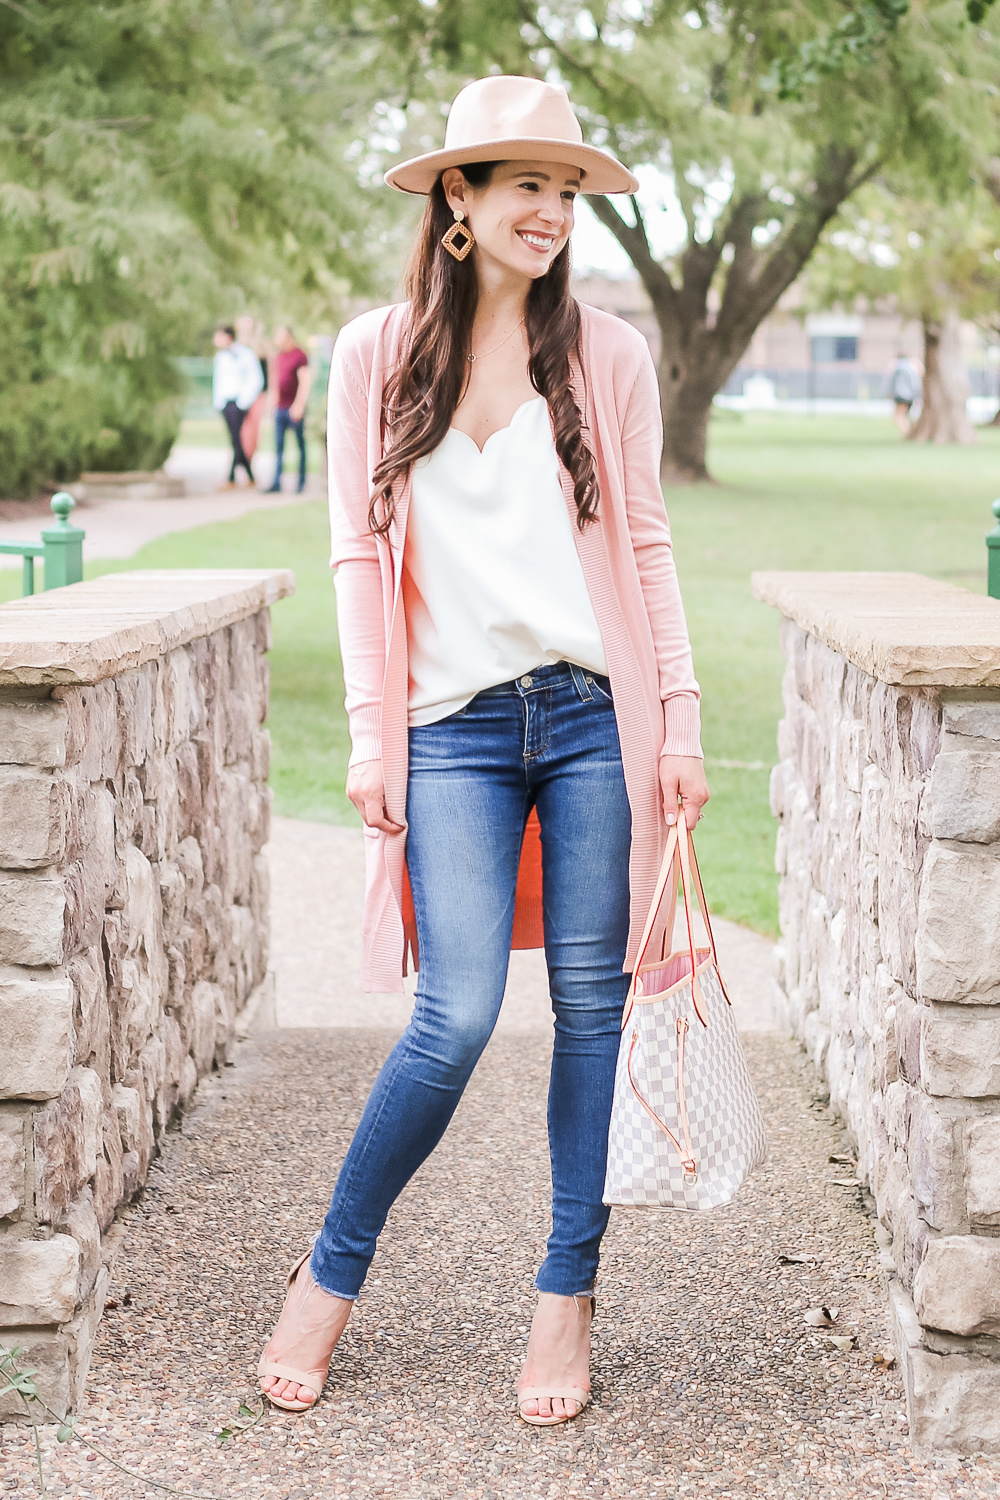 Casual Pink Cardigan Outfit styled by popular affordable fashion style blogger Stephanie Ziajka on Diary of a Debutante, Amazon light pink cardigan styled with J.Crew Factory scalloped cami top, AG the Legging super skinny jeans, Amazon Lanzom wide brim wool fedora hat, Amazon Louis Vuitton Neverfull dupe bag, Amazon nude block heel sandals, Amazon rattan earrings, and Amazon gold circle pendant necklace by Stephanie Ziajka on Diary of a Debutante